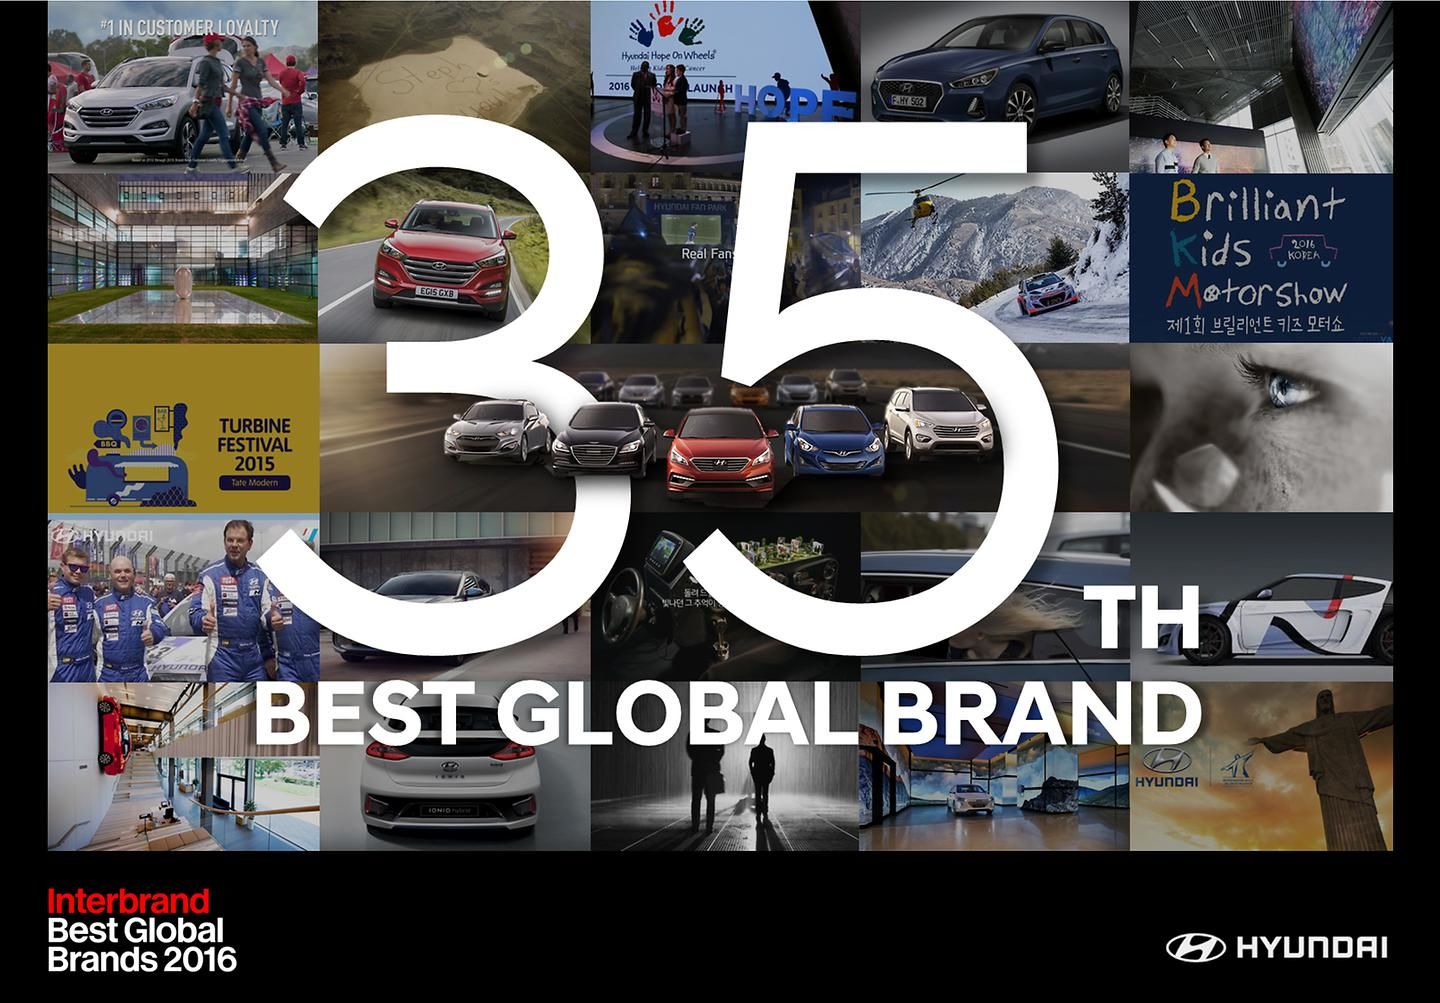 Hyundai Motor Global Brand Value Continues to Grow